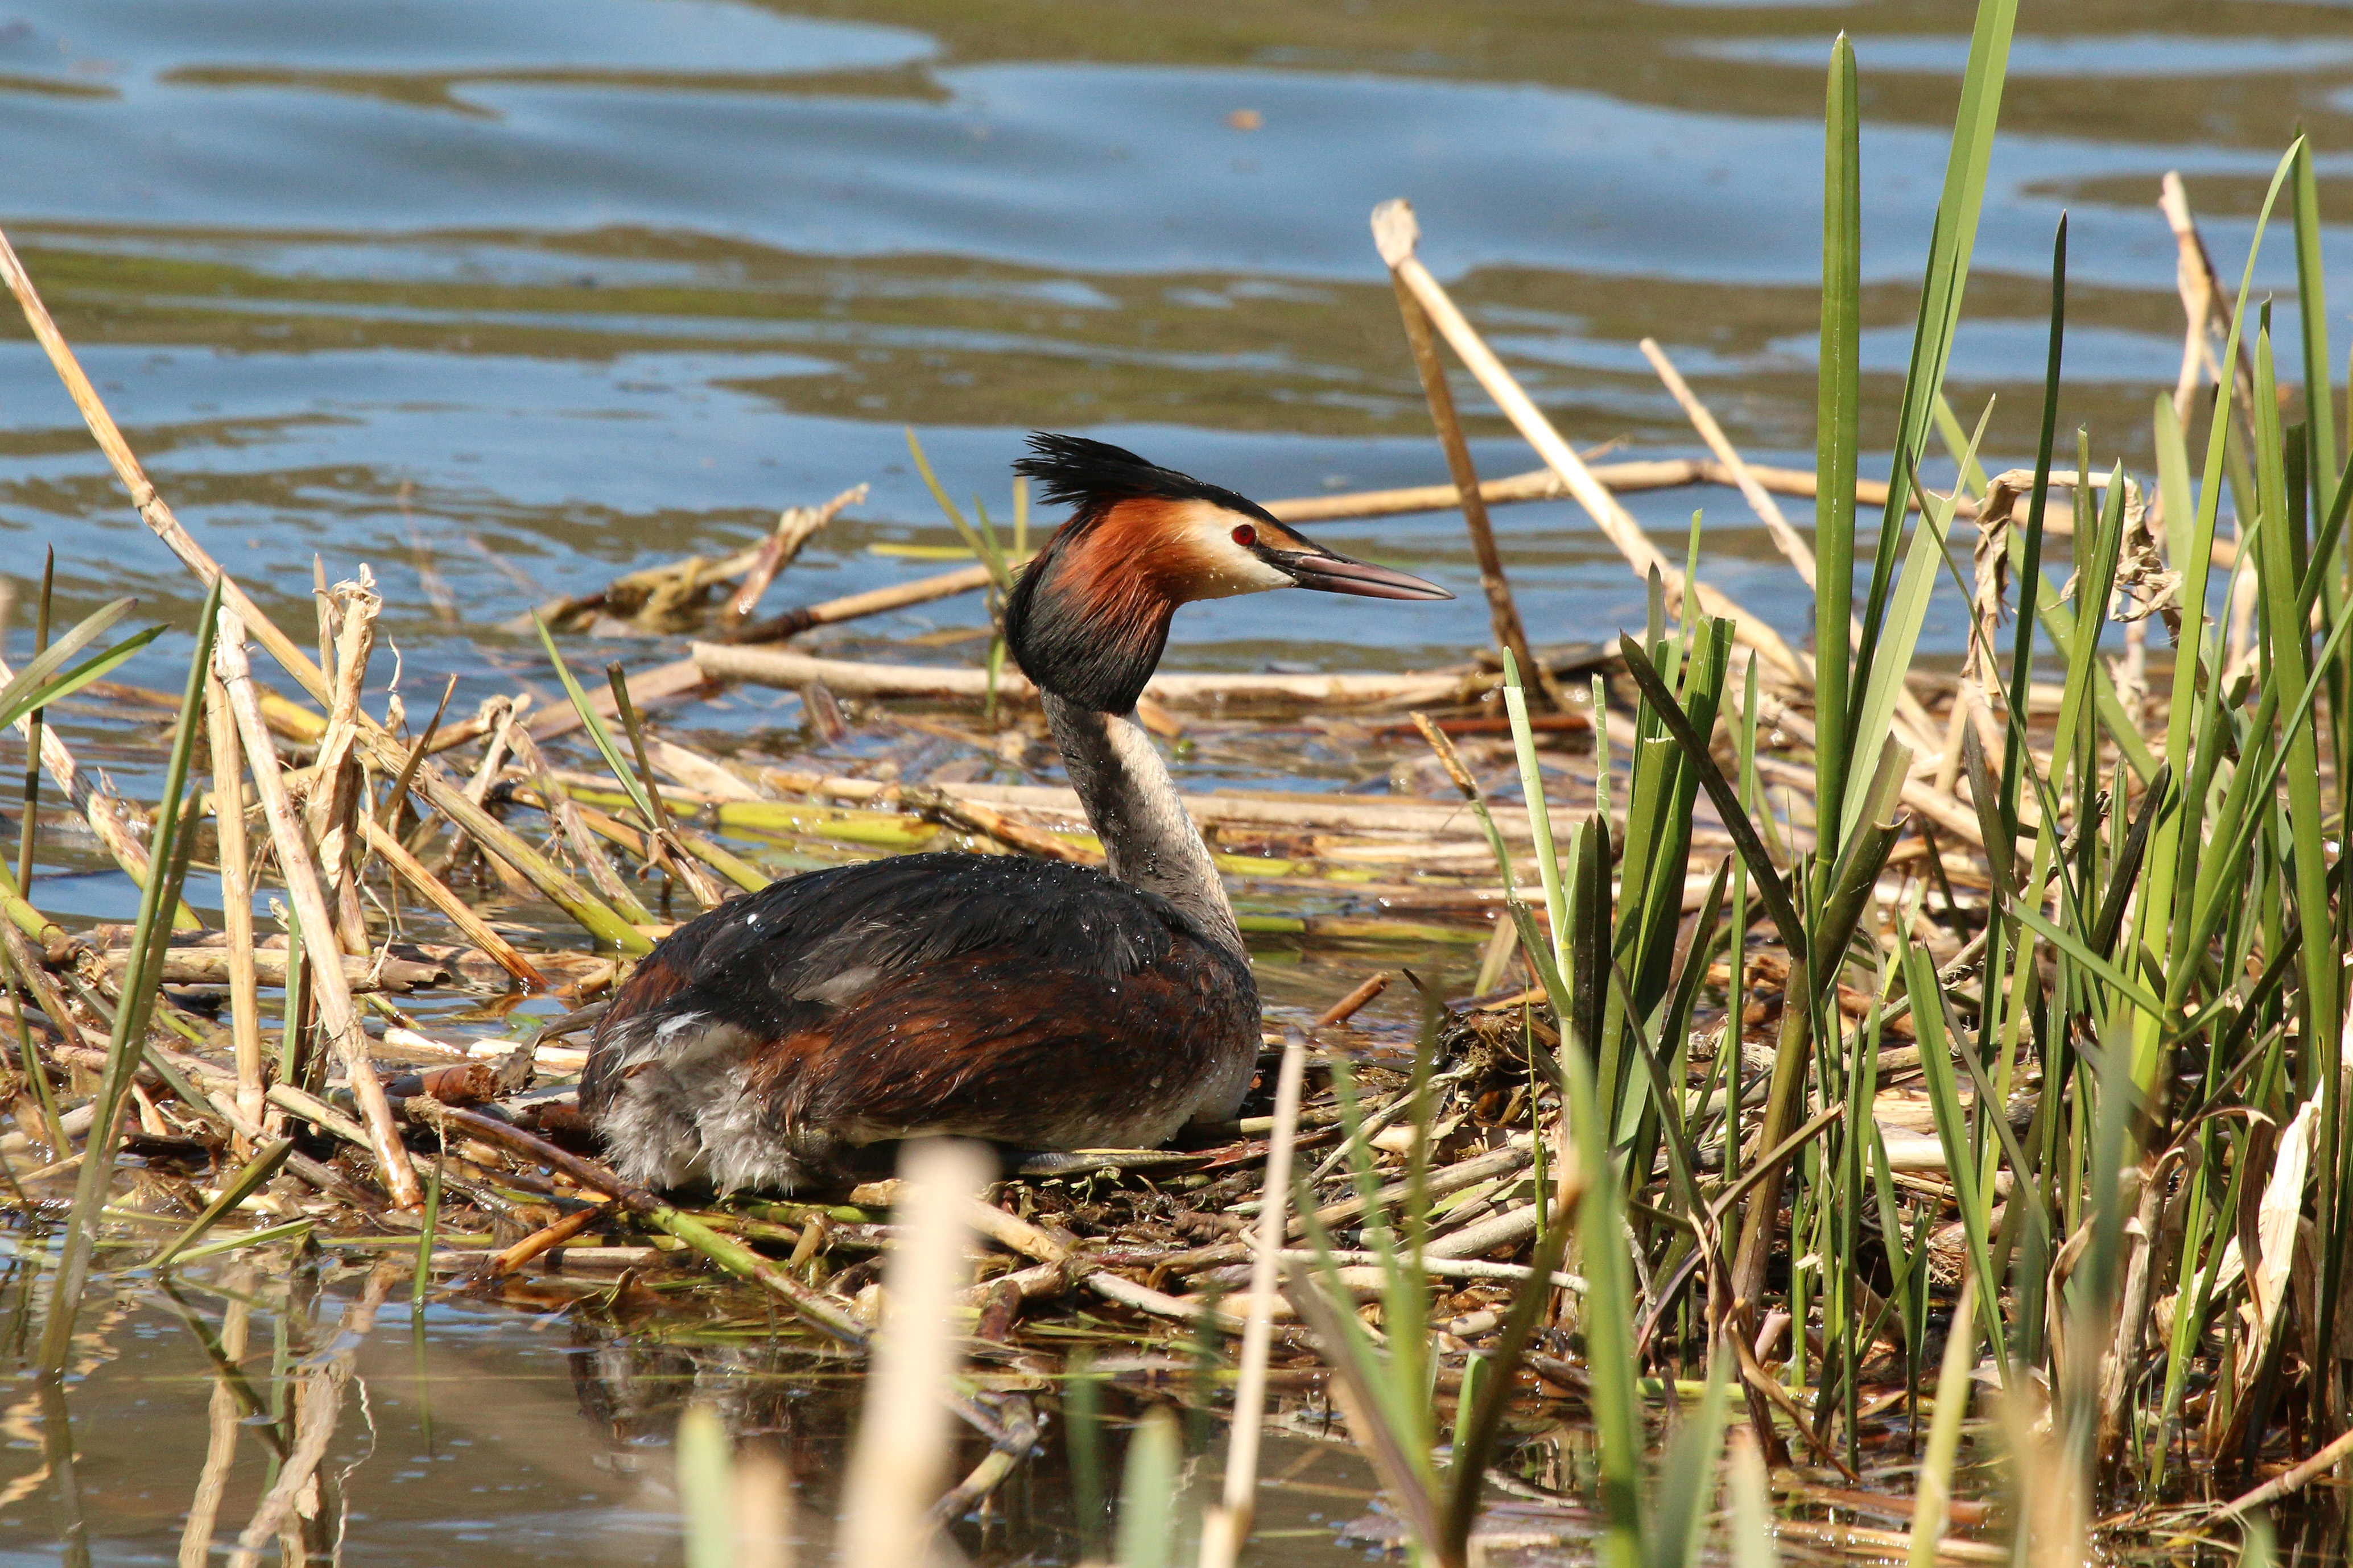 Great crested grebe (Podiceps cristatus) on nest